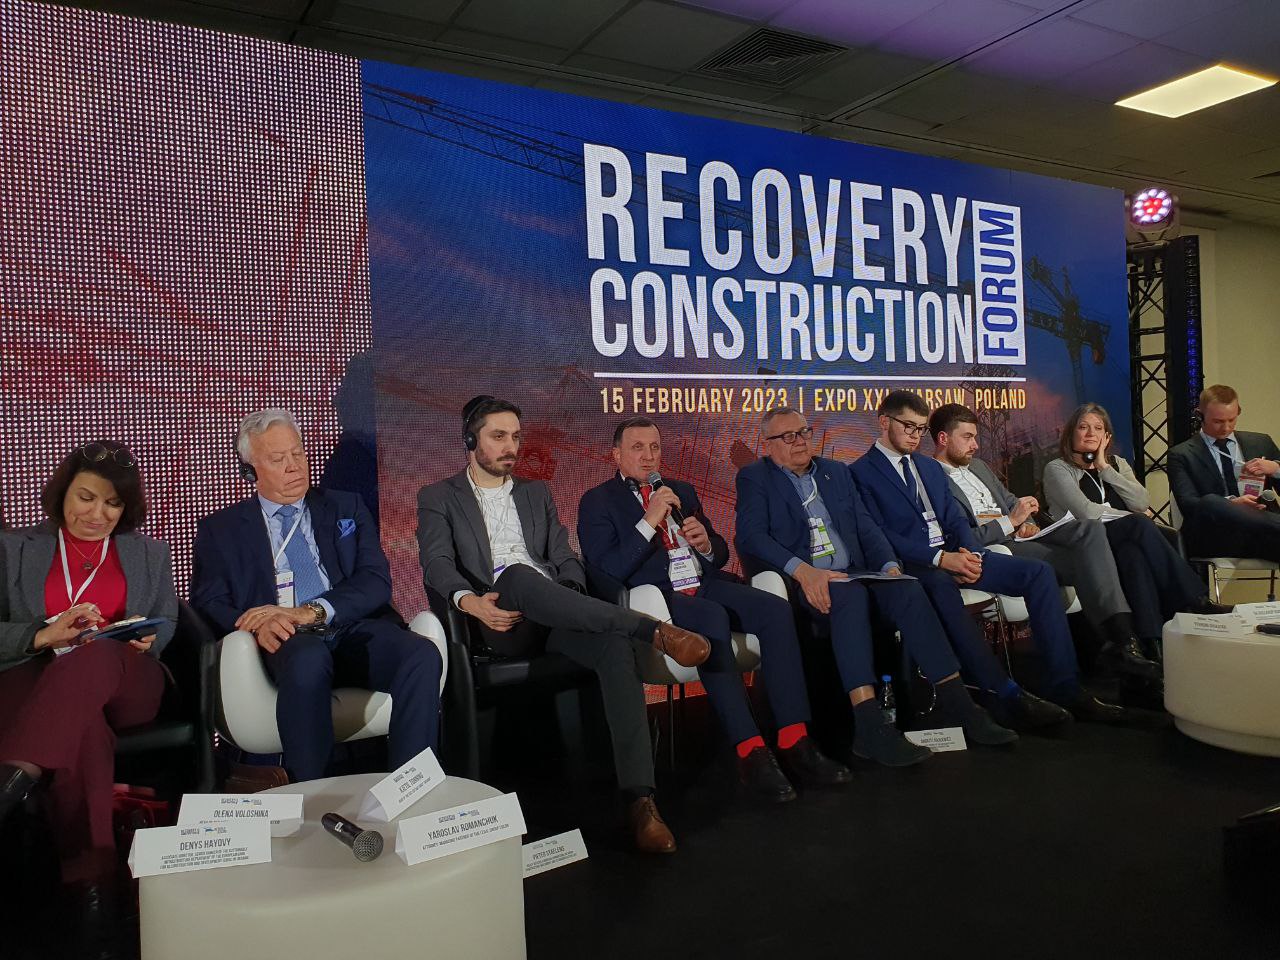 Constructive power: EUCON has become a strategic partner of the Recovery Construction Forum